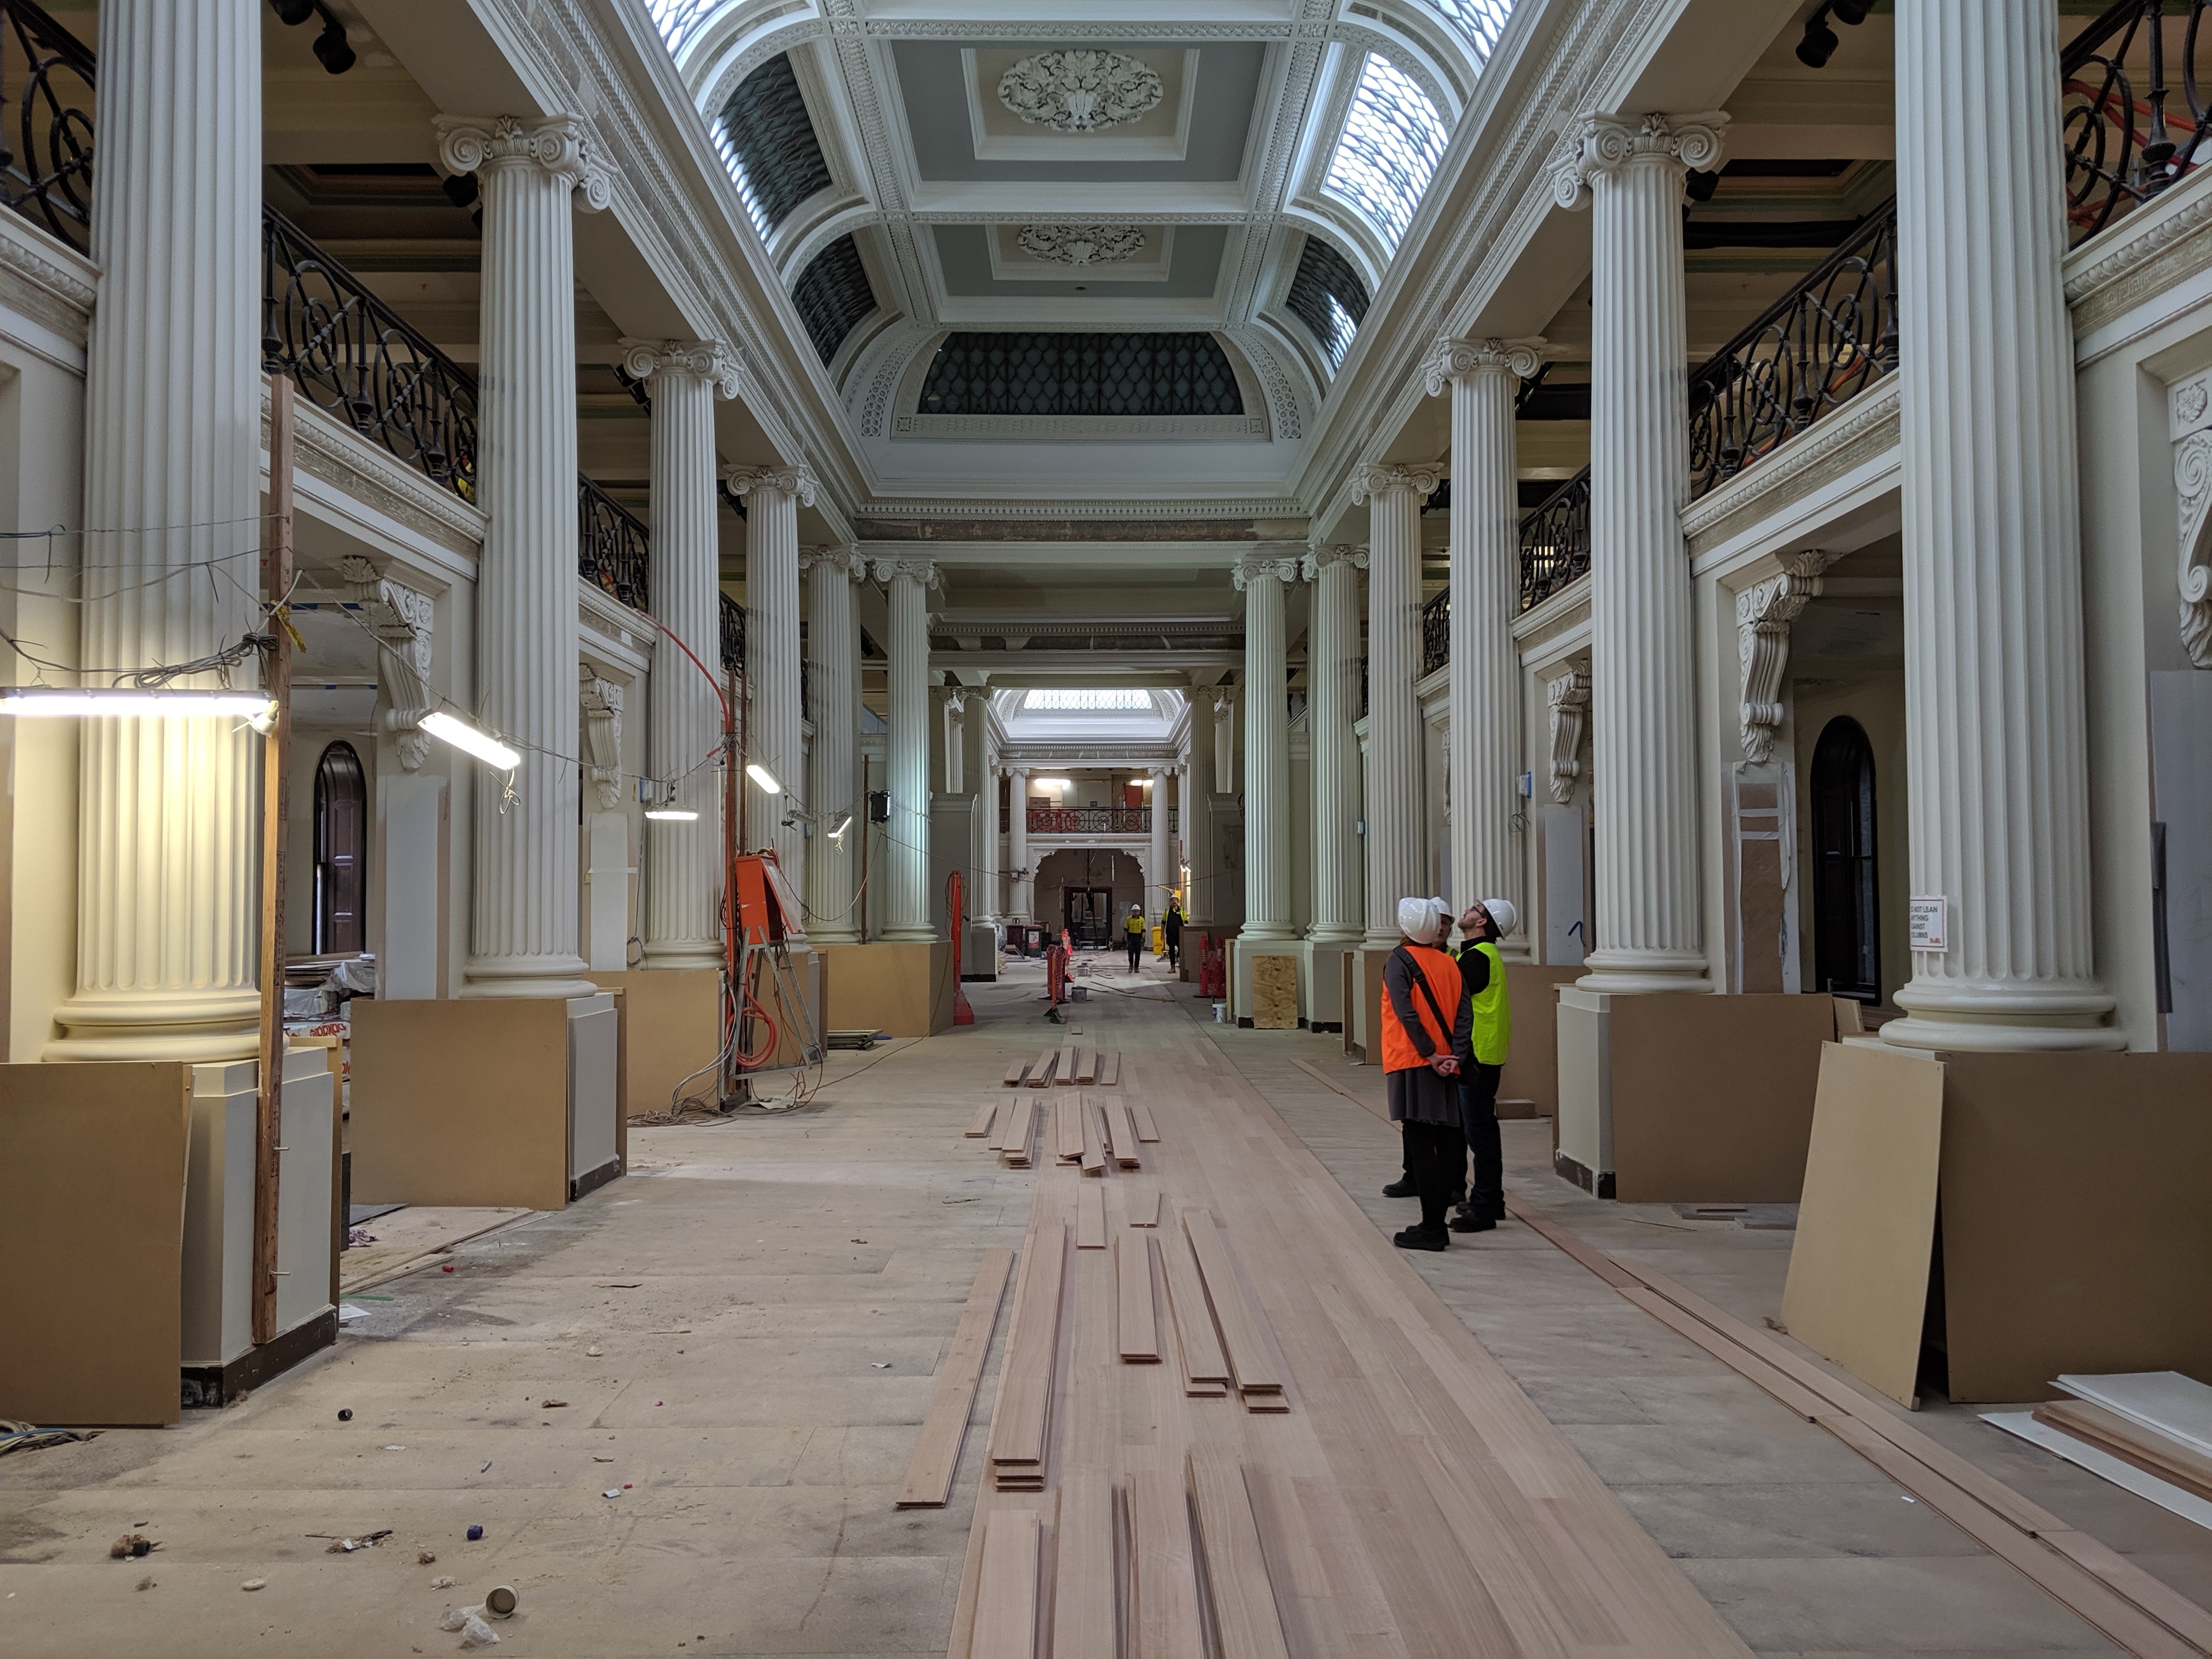 Workers at the State Library of Victoria during redevelopment works